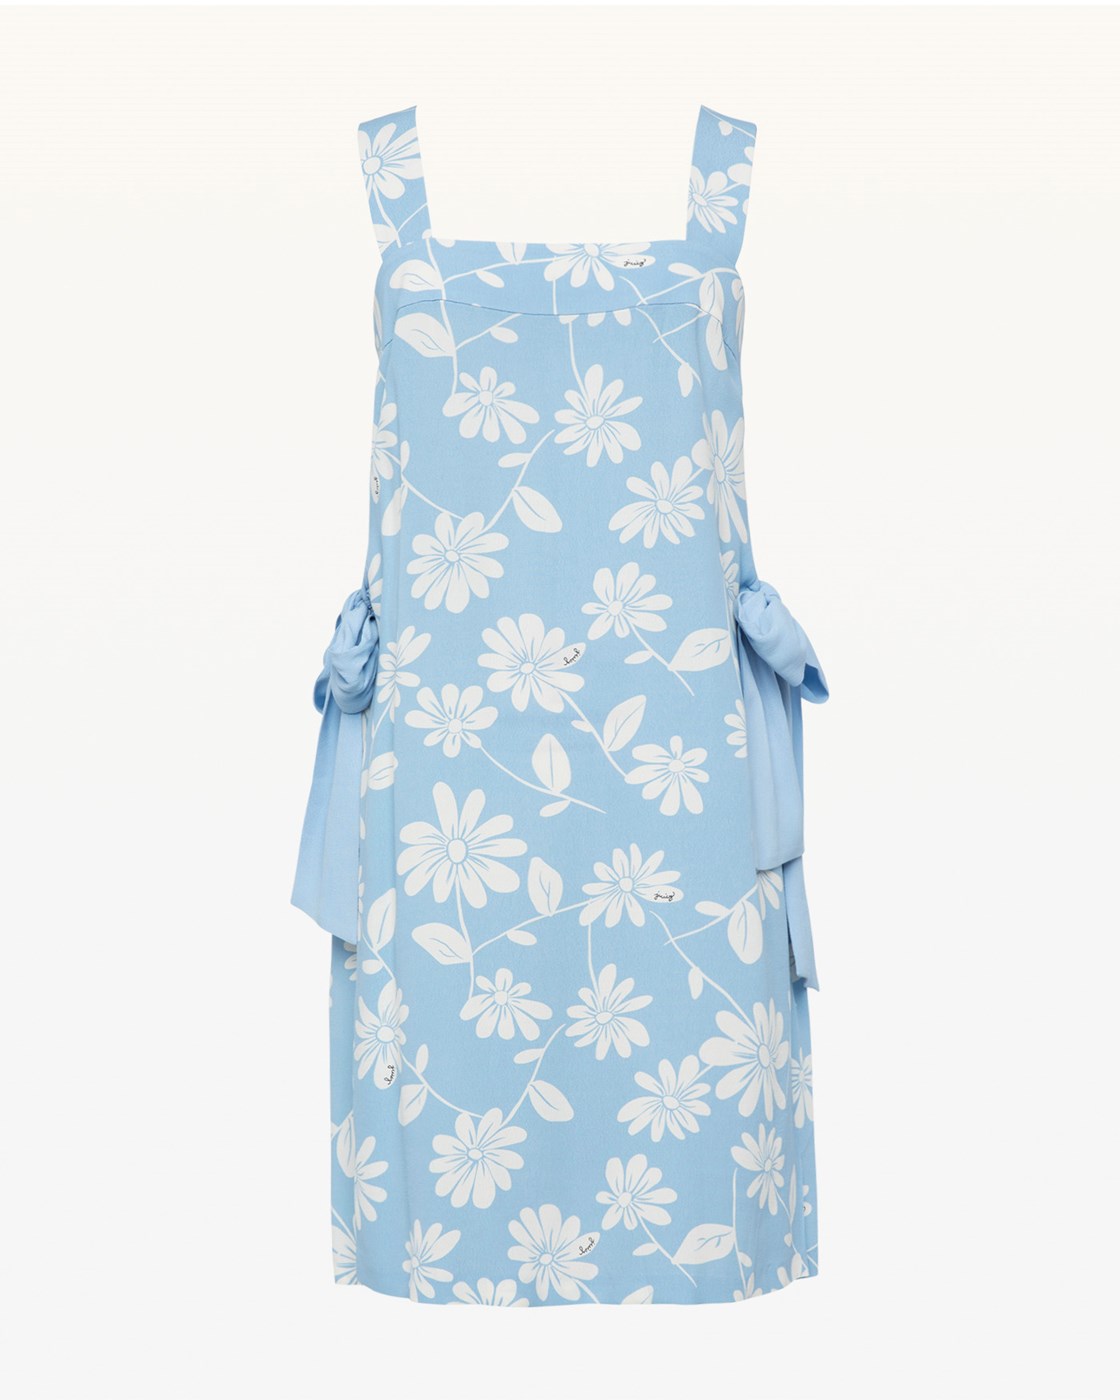 Juicy Couture Sketched Daisies Dress